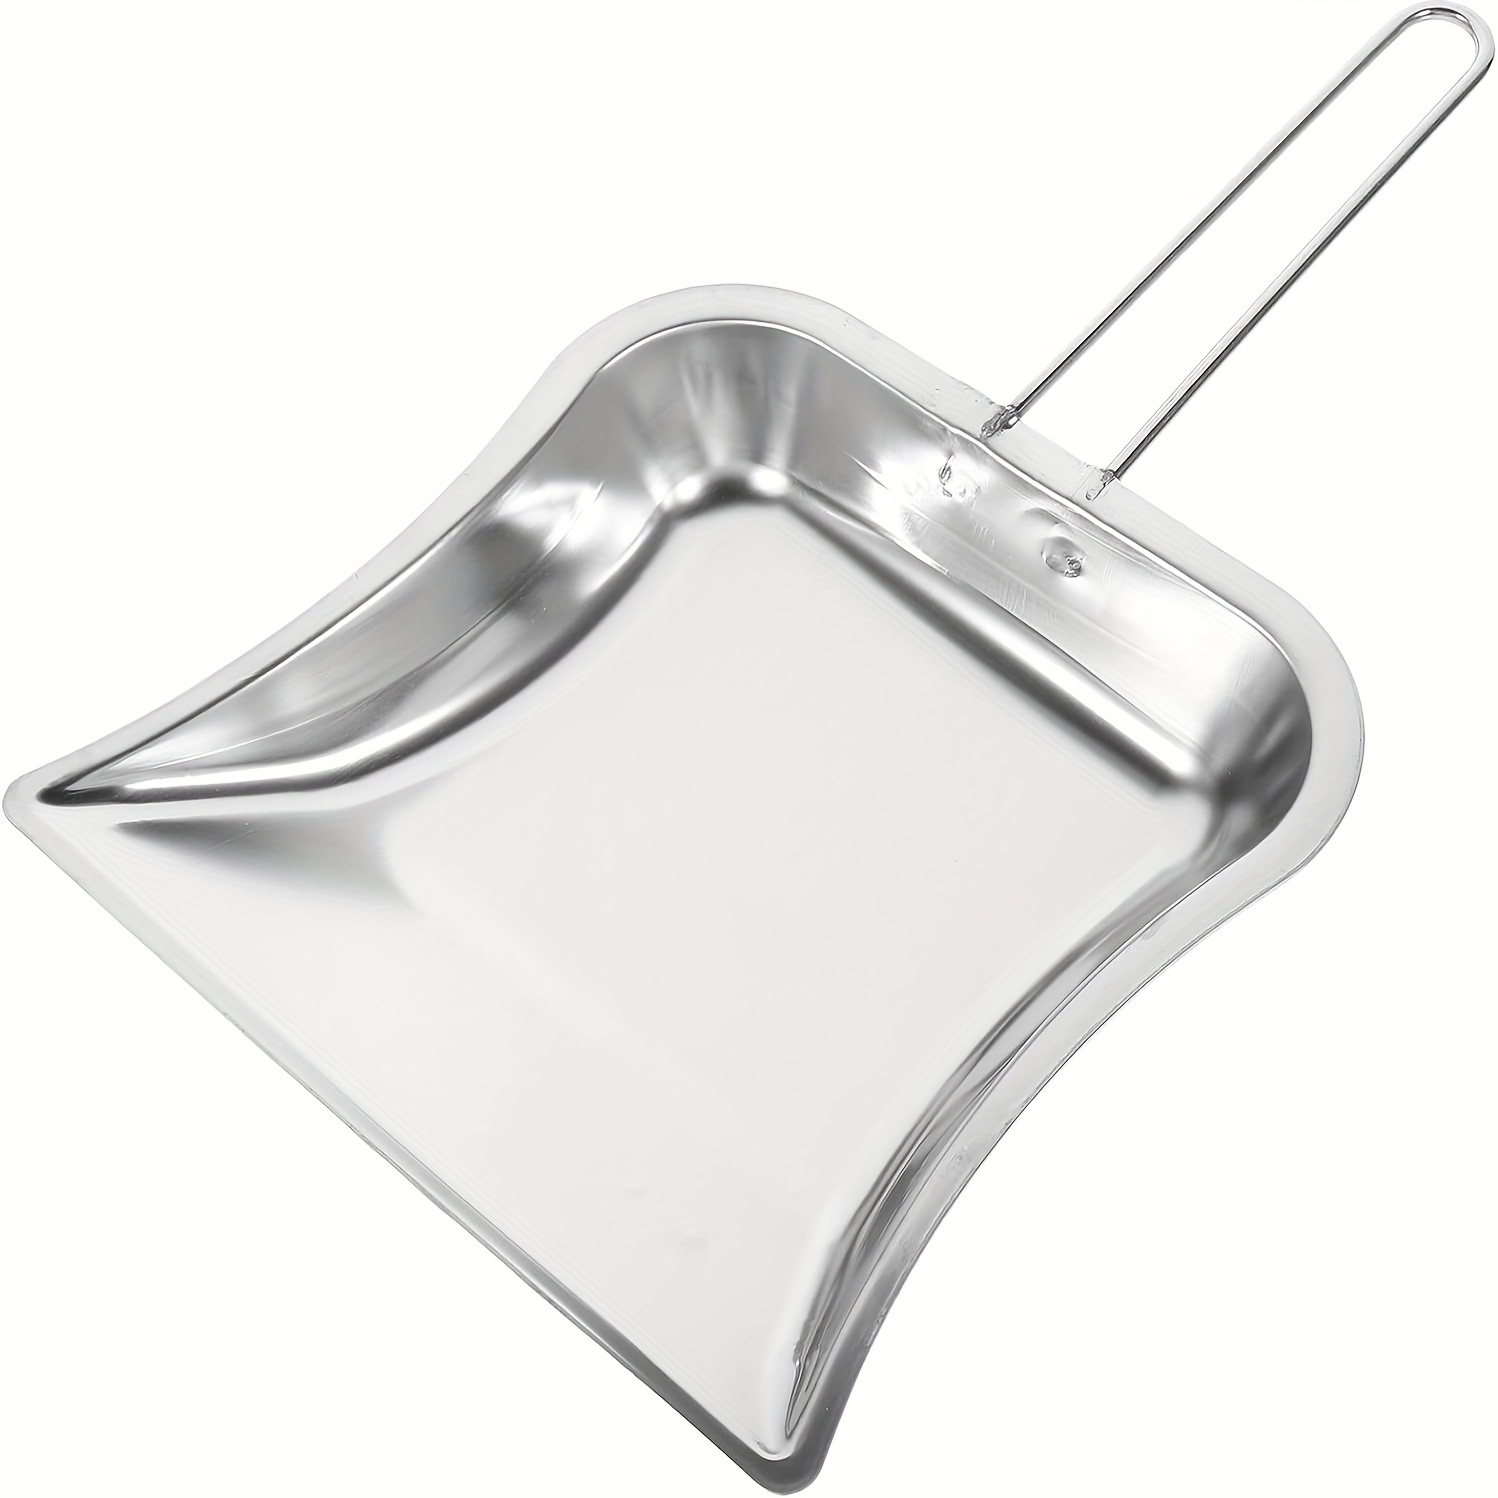 

Heavy Duty Stainless Steel Dustpan With Handle - Metal Handheld Trash Shovel For Living Room, Bedroom, Outdoor Use - Precision Edge, Durable, Safe, Hanging Design - 1pc Dust Pan For Home Comfort